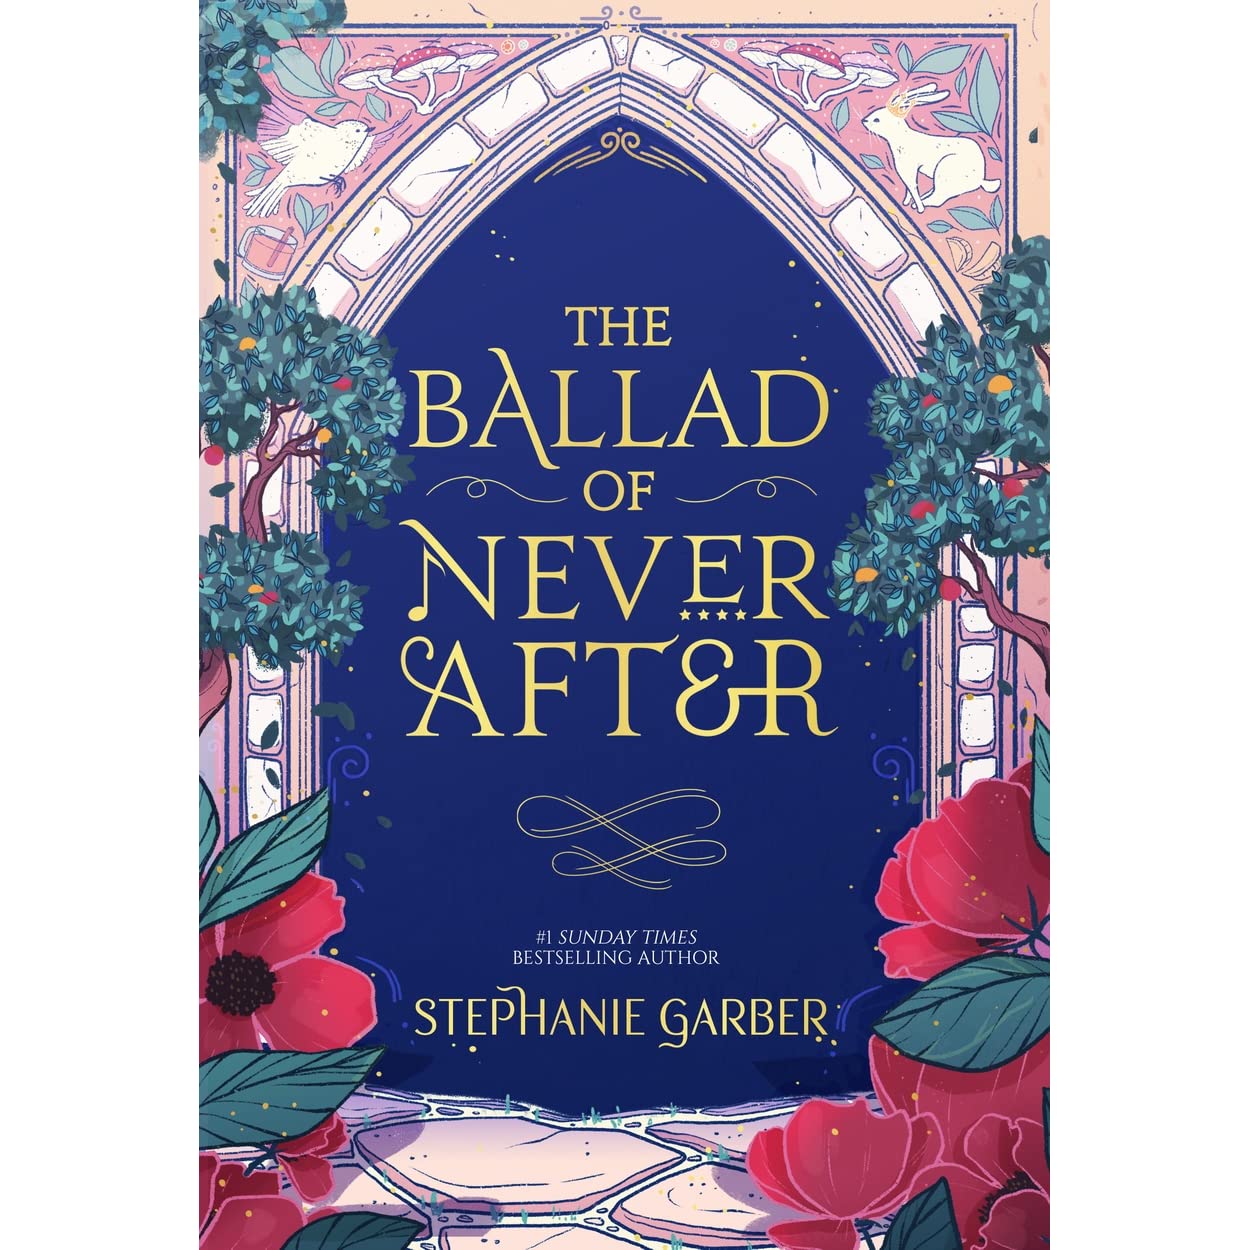 “The Ballad Of Never After”: ‌Release Date Of Stephanie Garber's New Book